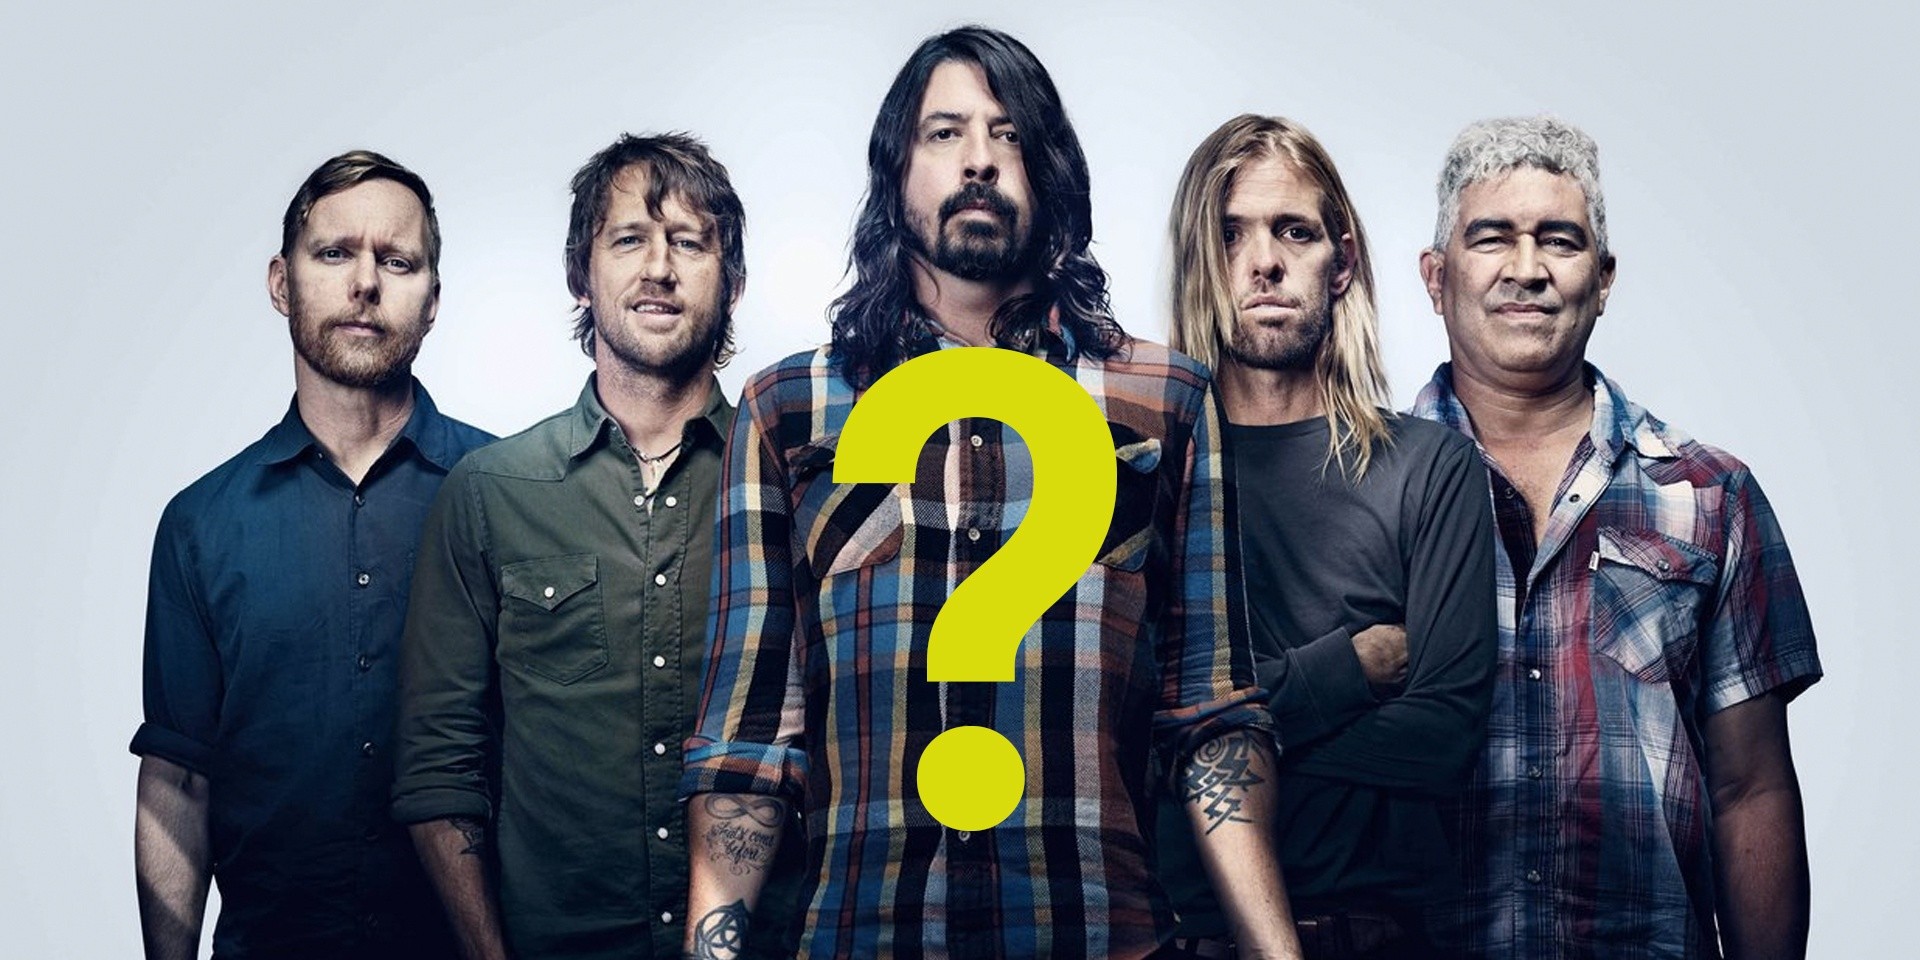 Is Neon Lights hinting at Foo Fighters for their next line-up?